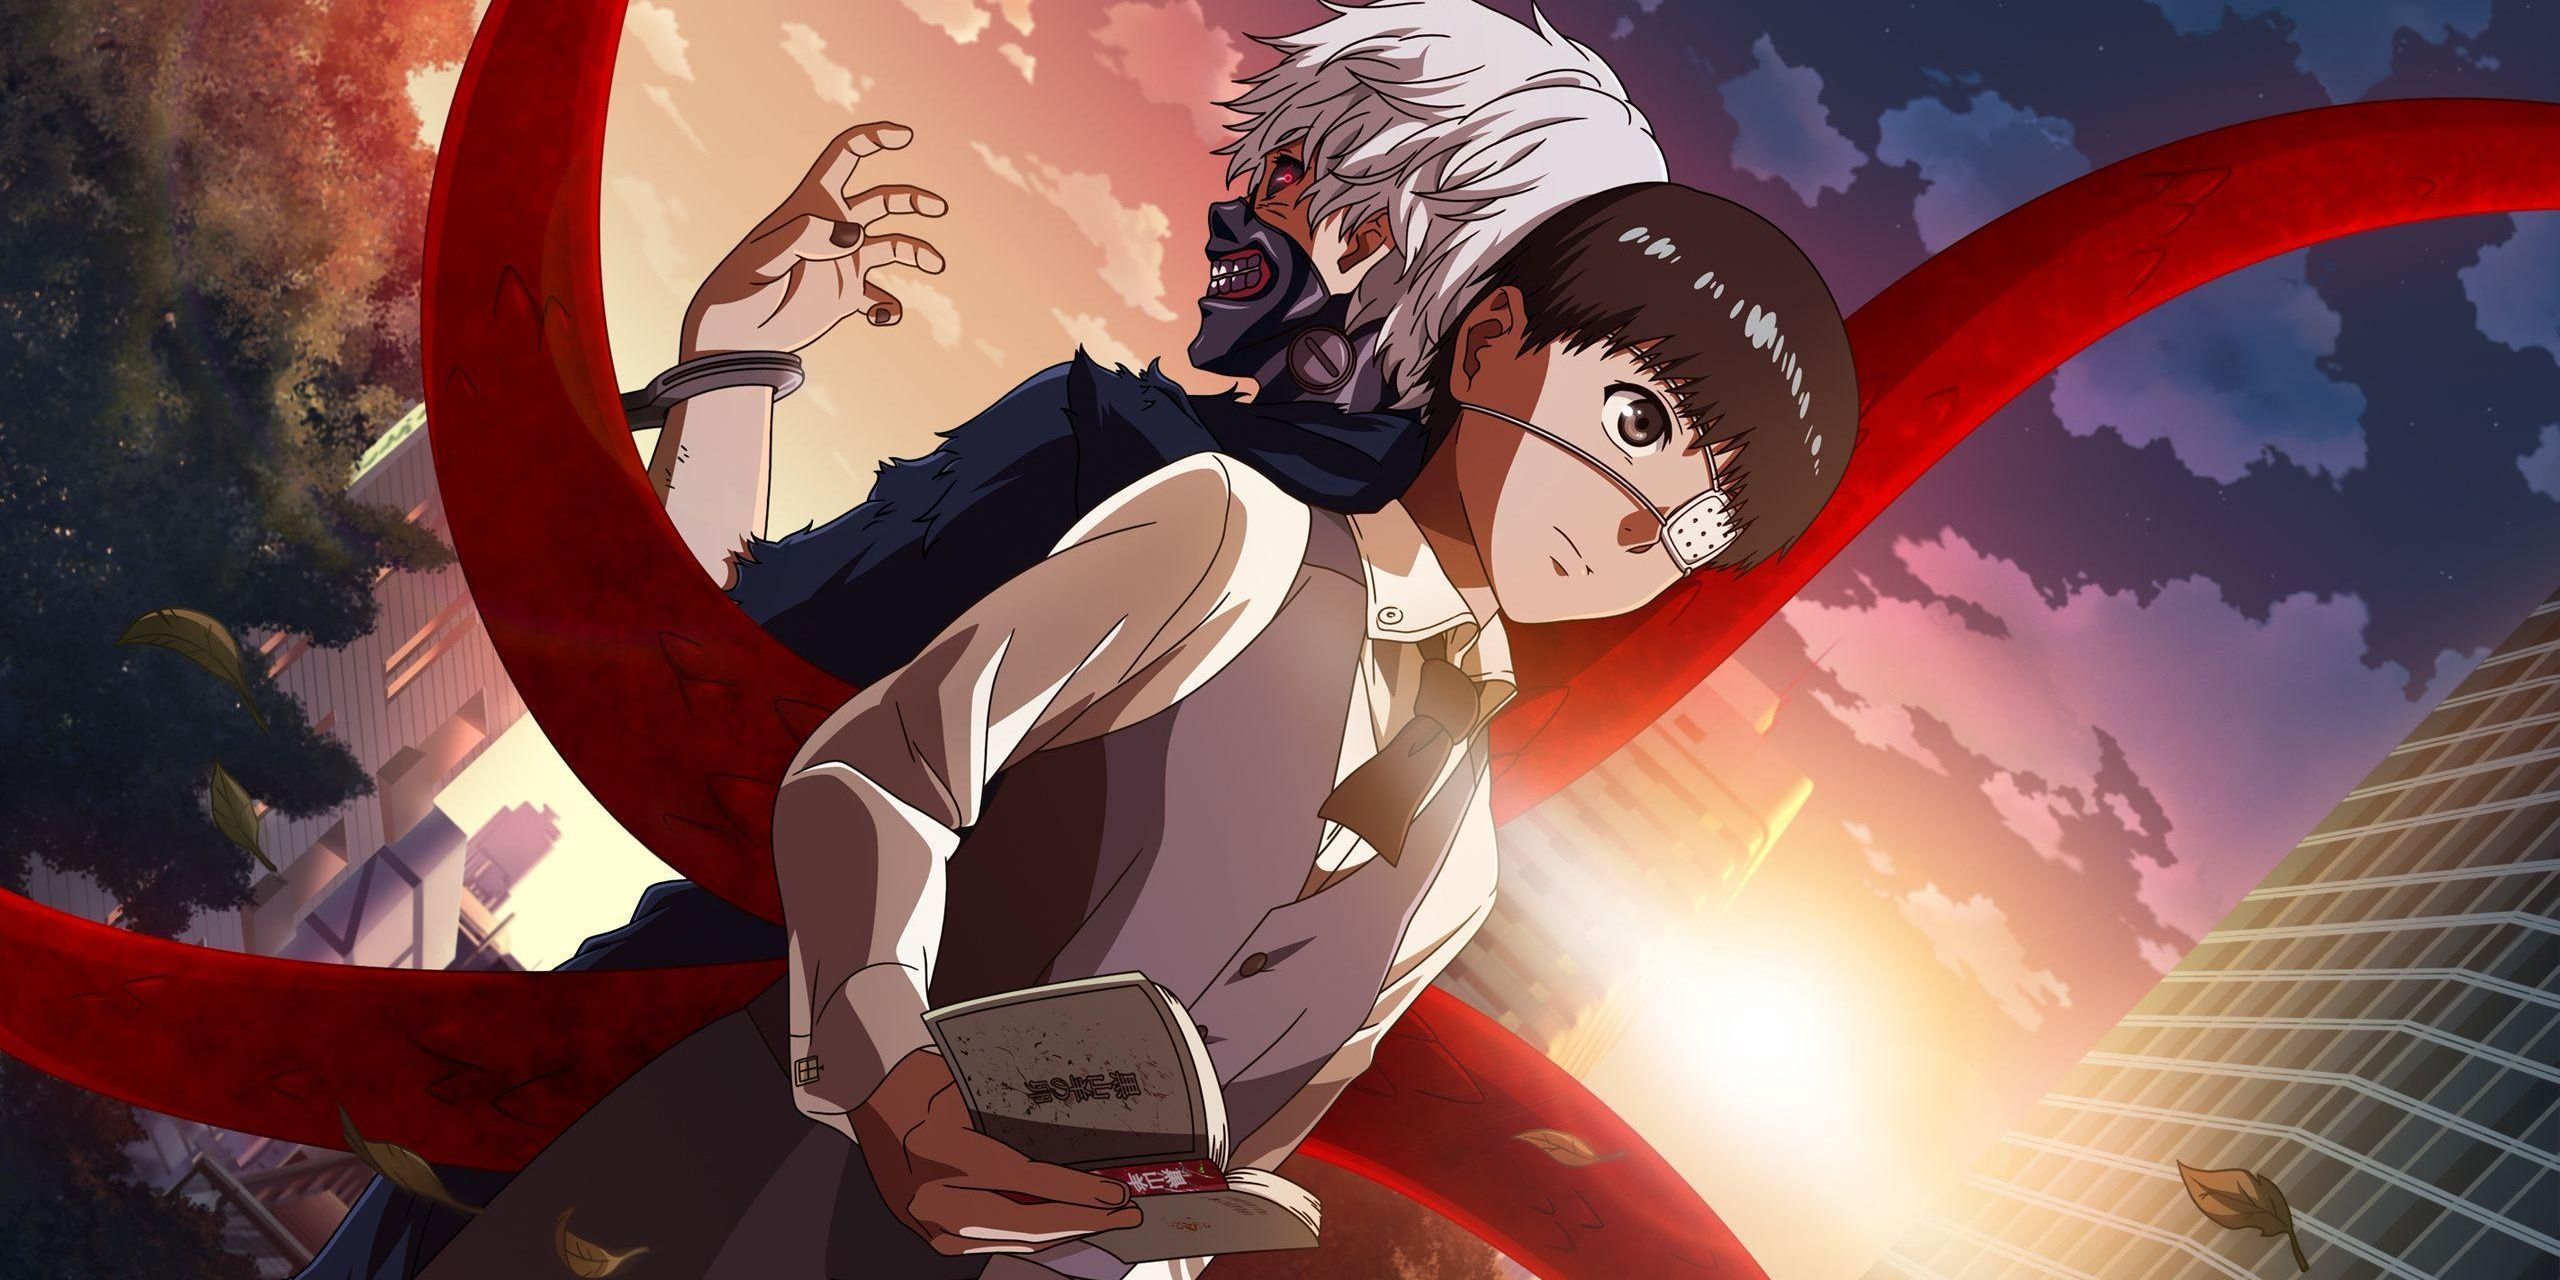 Ken Kaneki's white hair and black hair versions standing back-to-back against a sunset